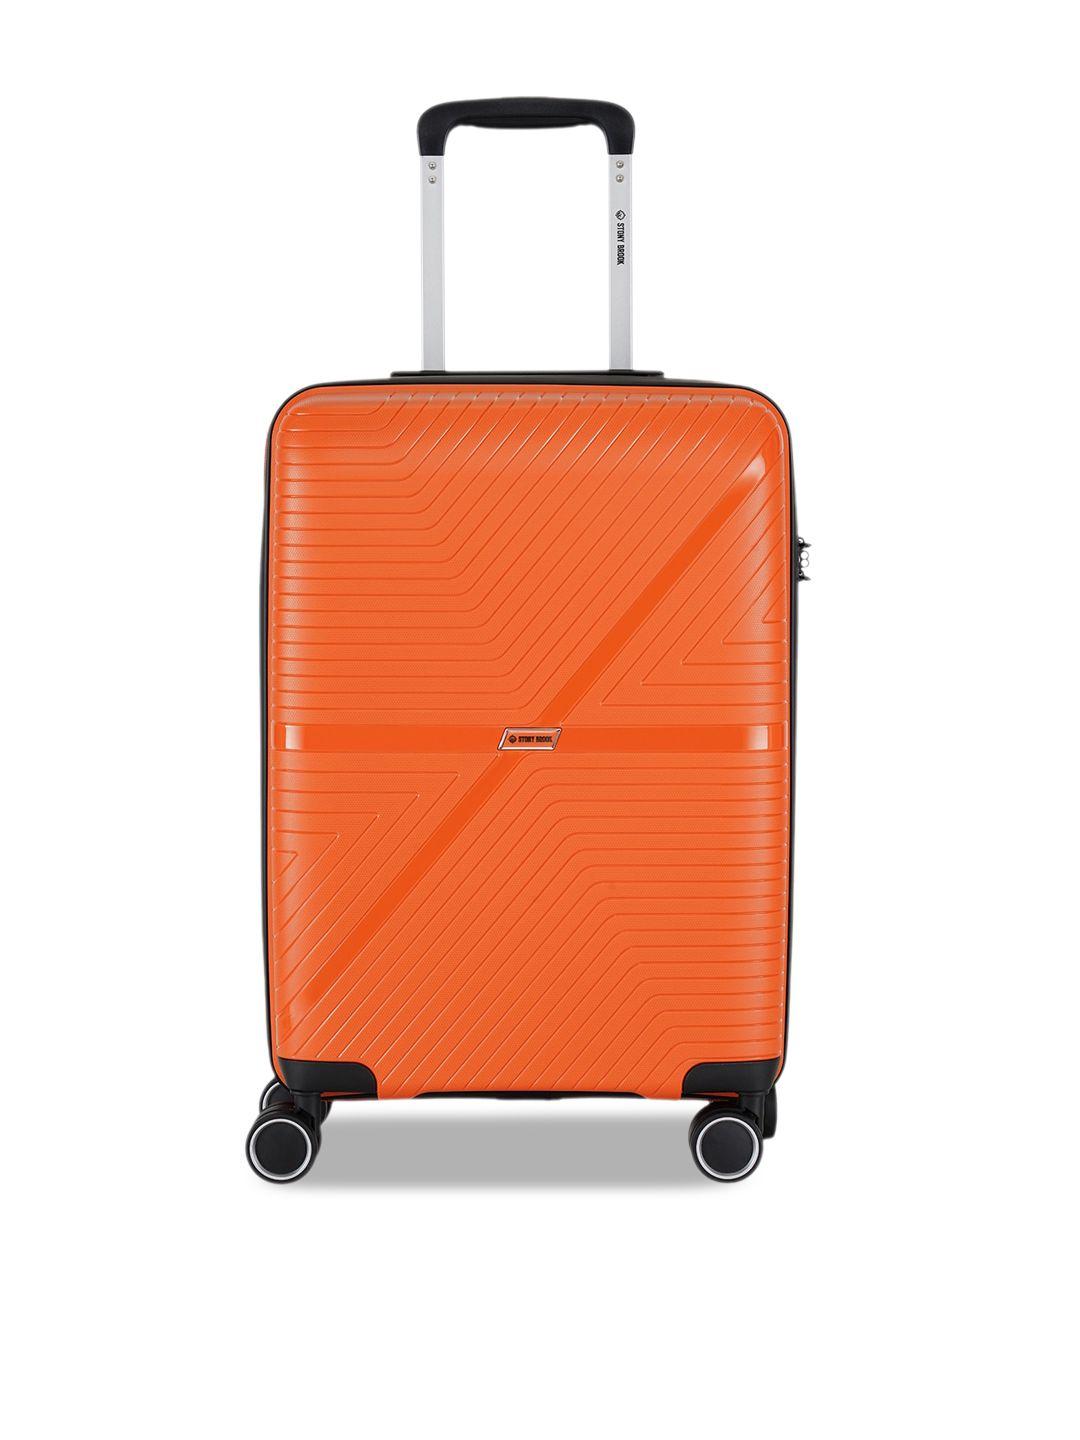 stony-brook-by-nasher-miles-axis-textured-hard-sided-large-trolley-suitcase-40l